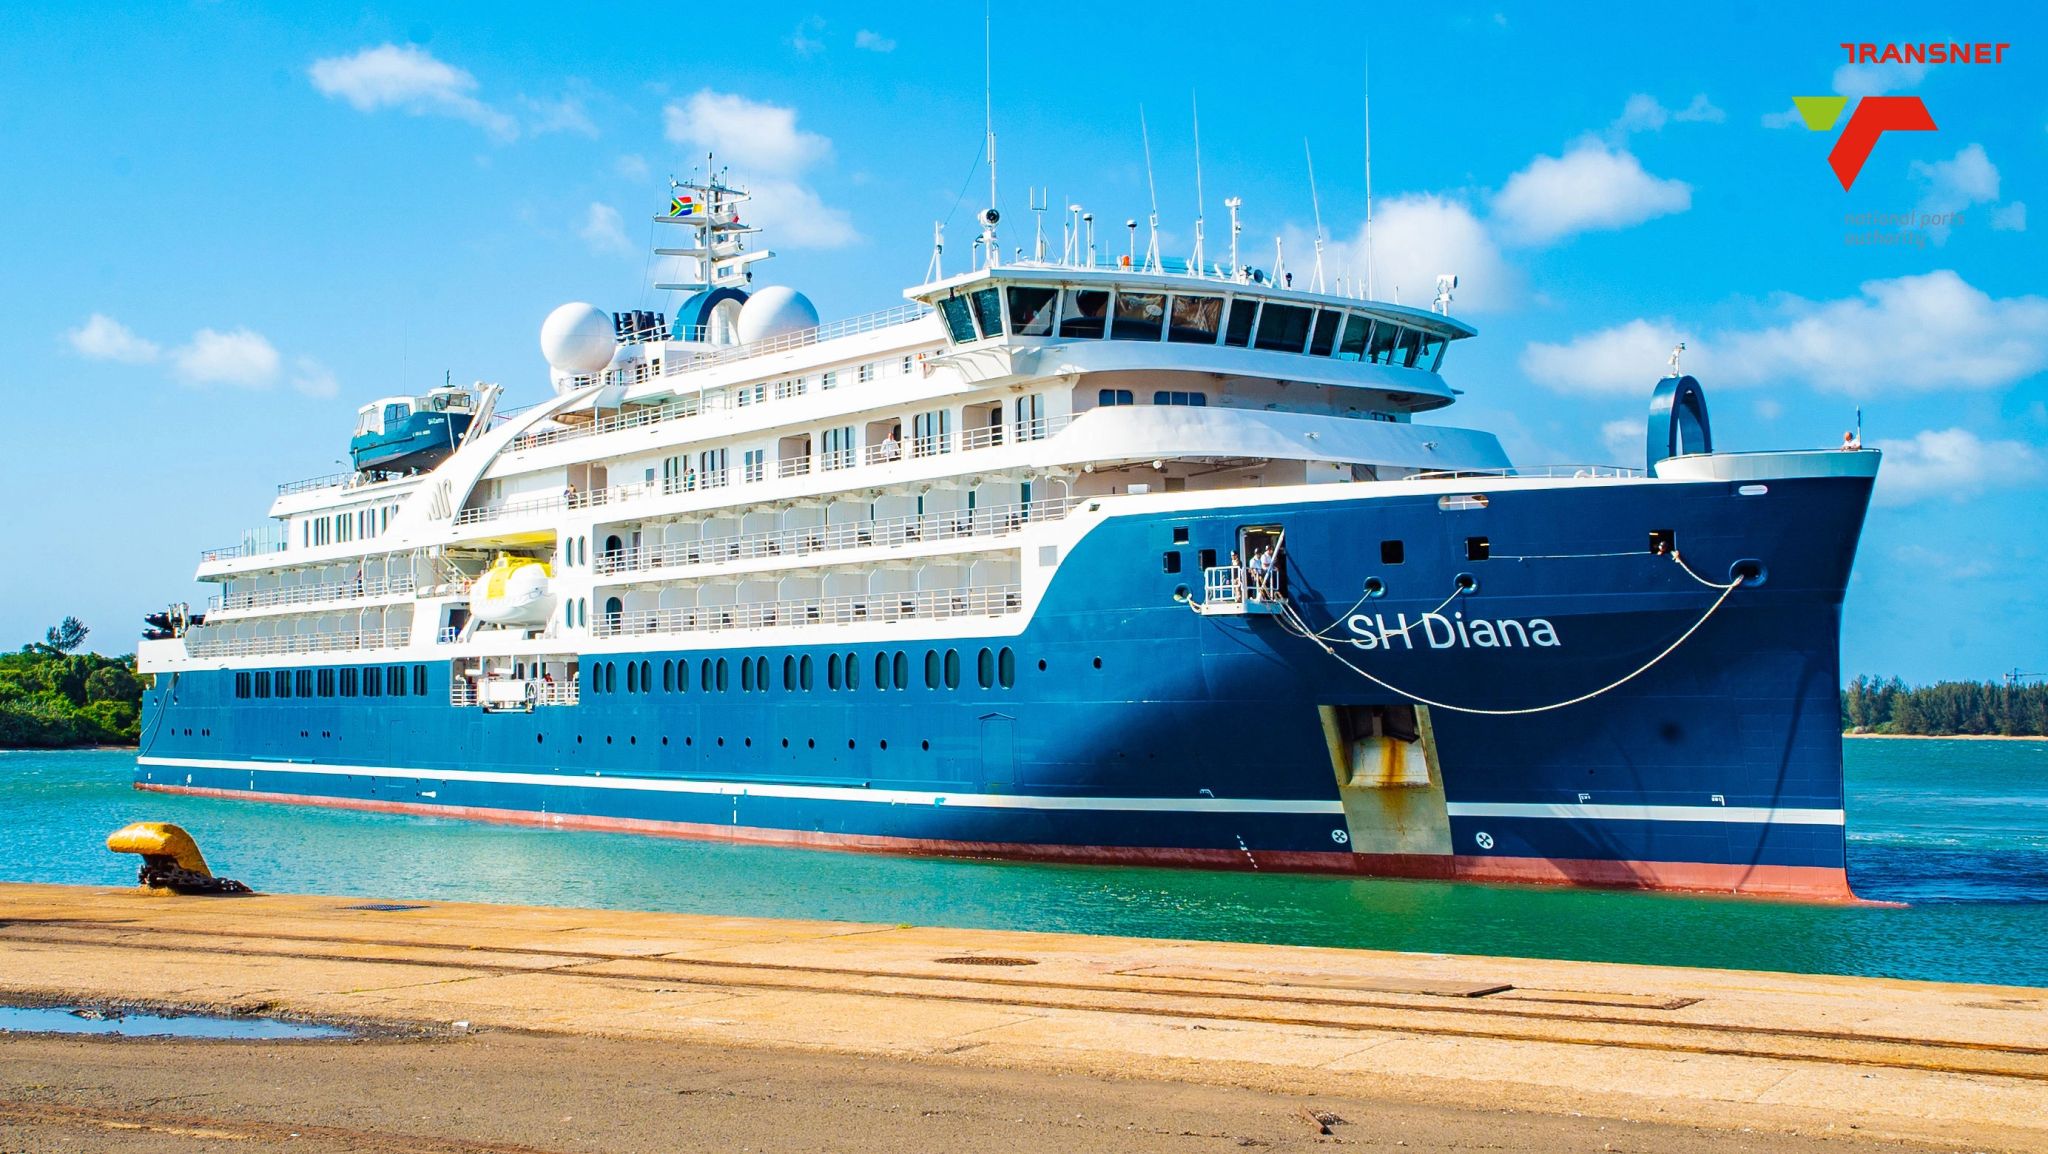 South Africa Port Of Richards Bay Welcomes Newly Built Ms Sh Diana To Kick Off 2023 24 Cruise